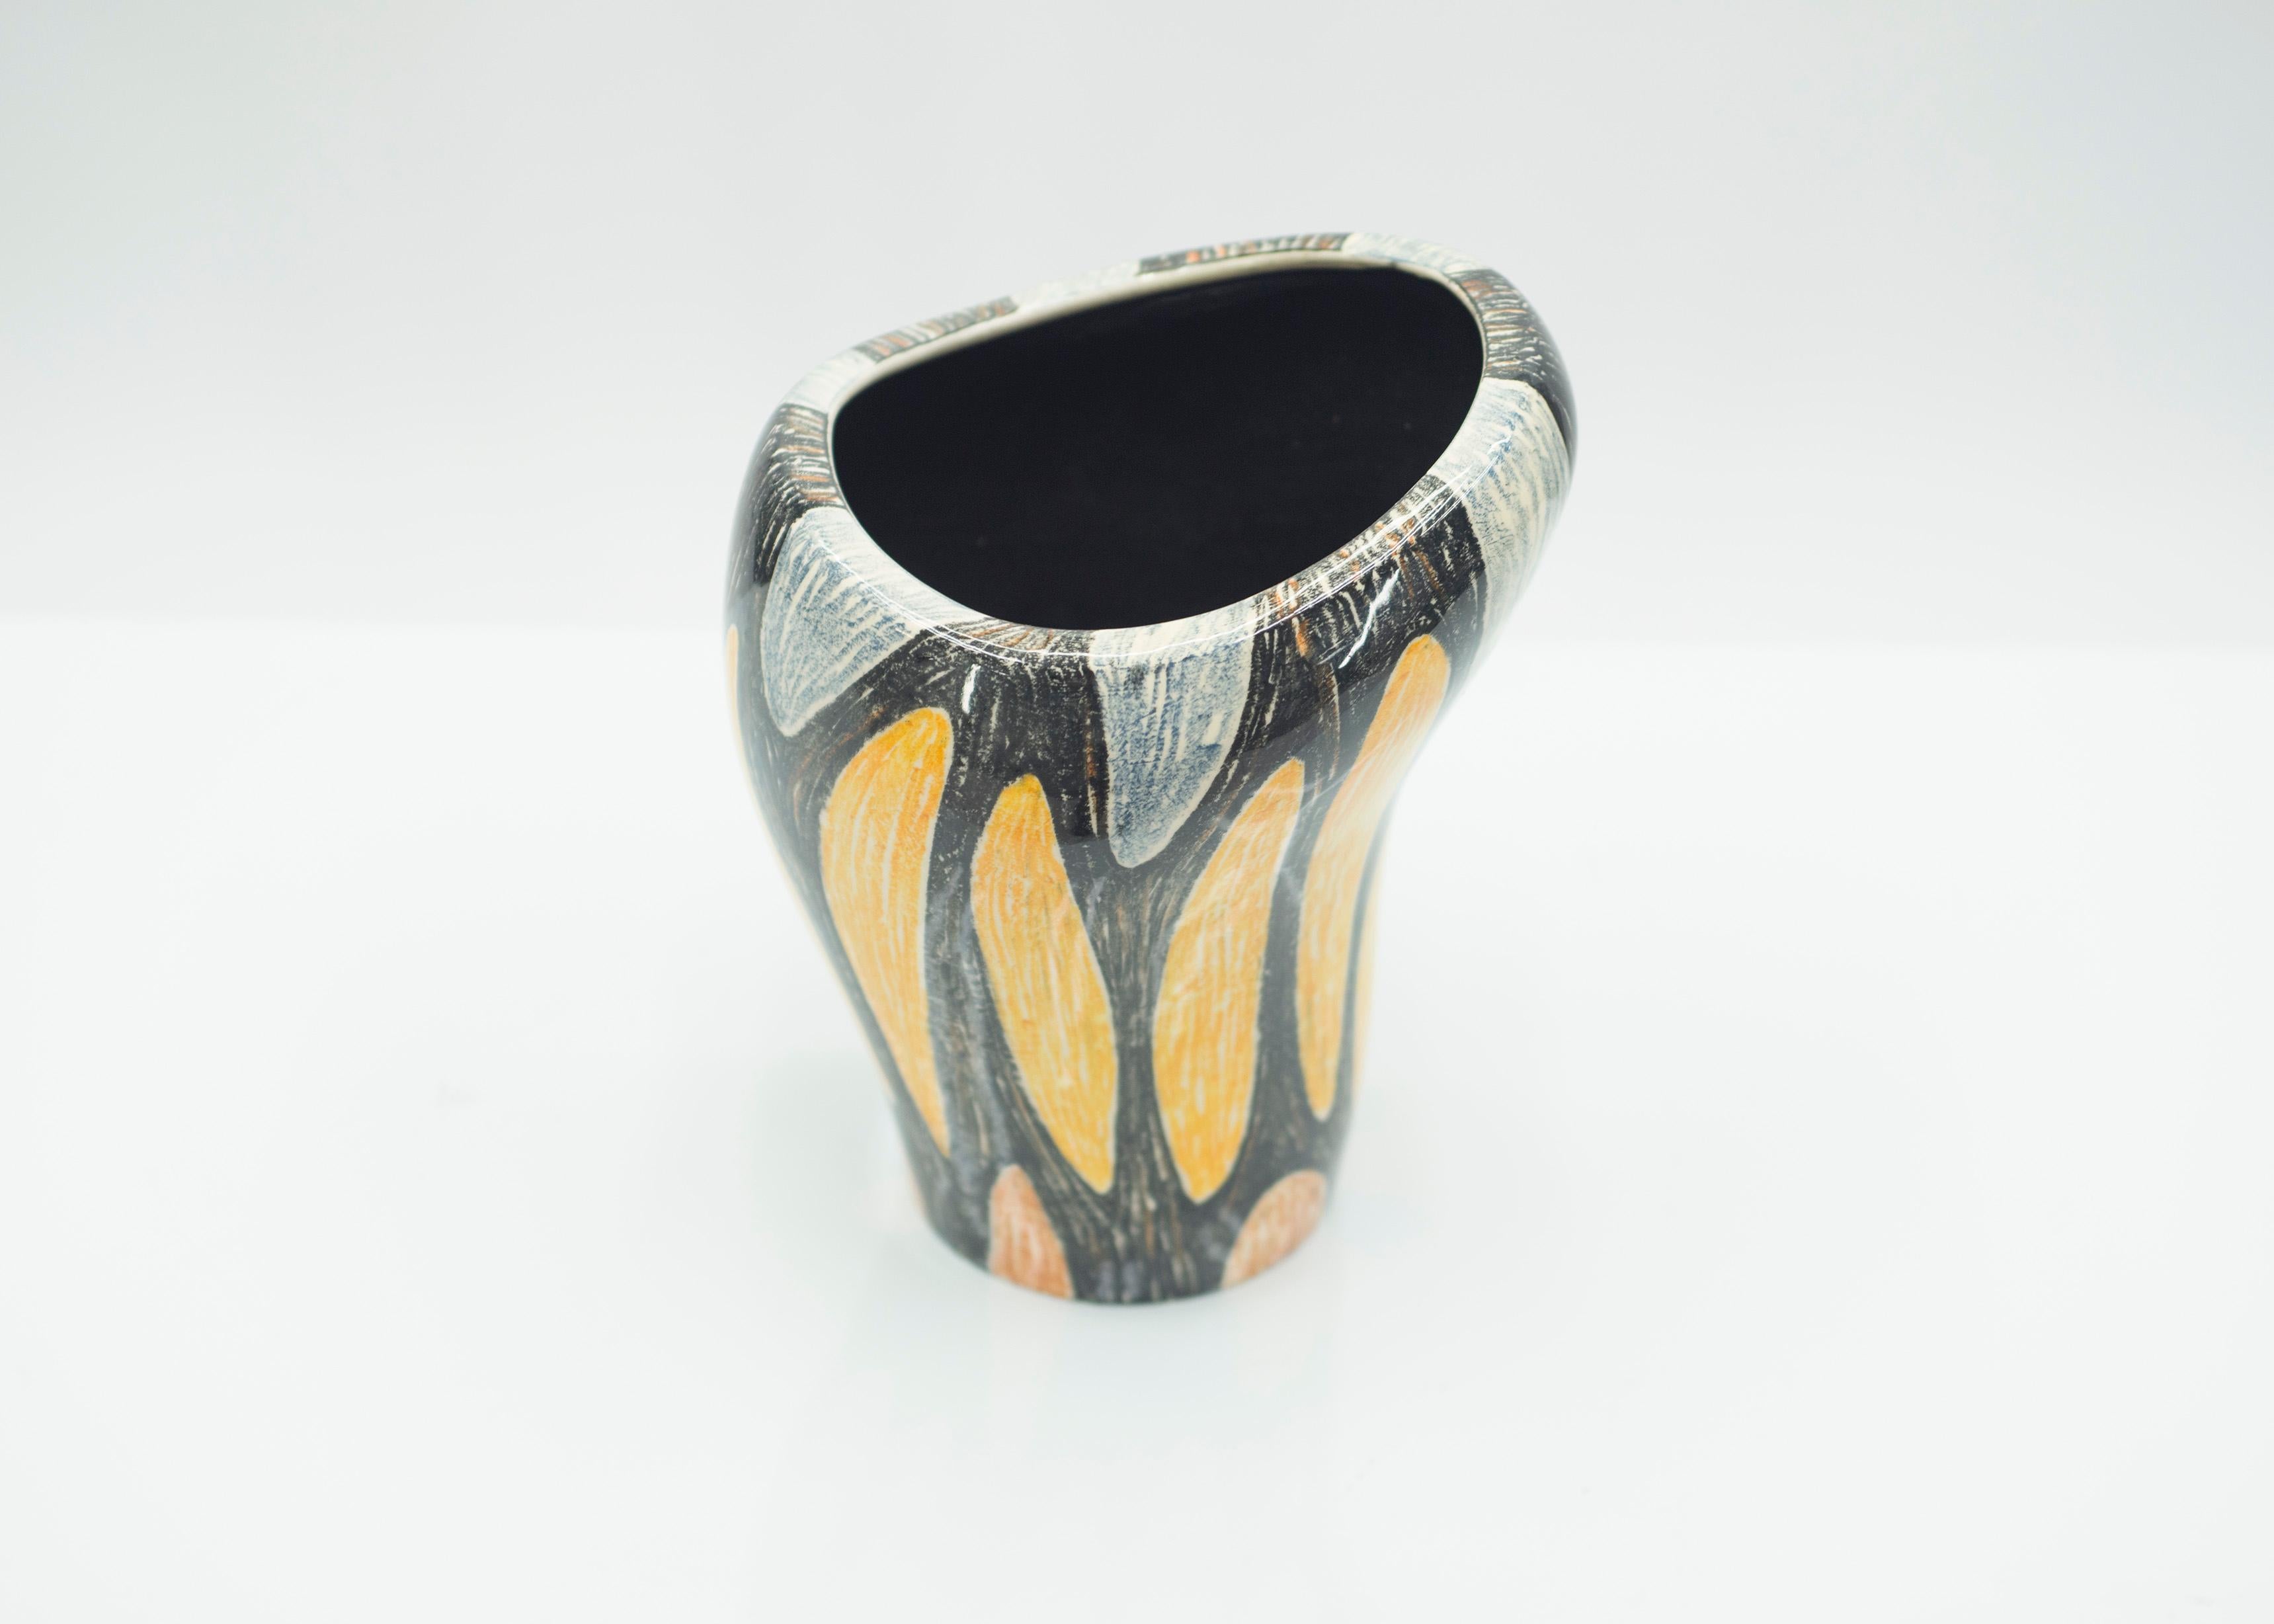 This curved French Art Deco period ceramic vase would be beautiful in any space. It was created in the early 1940s by a French ceramicist from the South of France, with an ample body and a beautiful color scheme. A chic and timeless piece. Hint of a